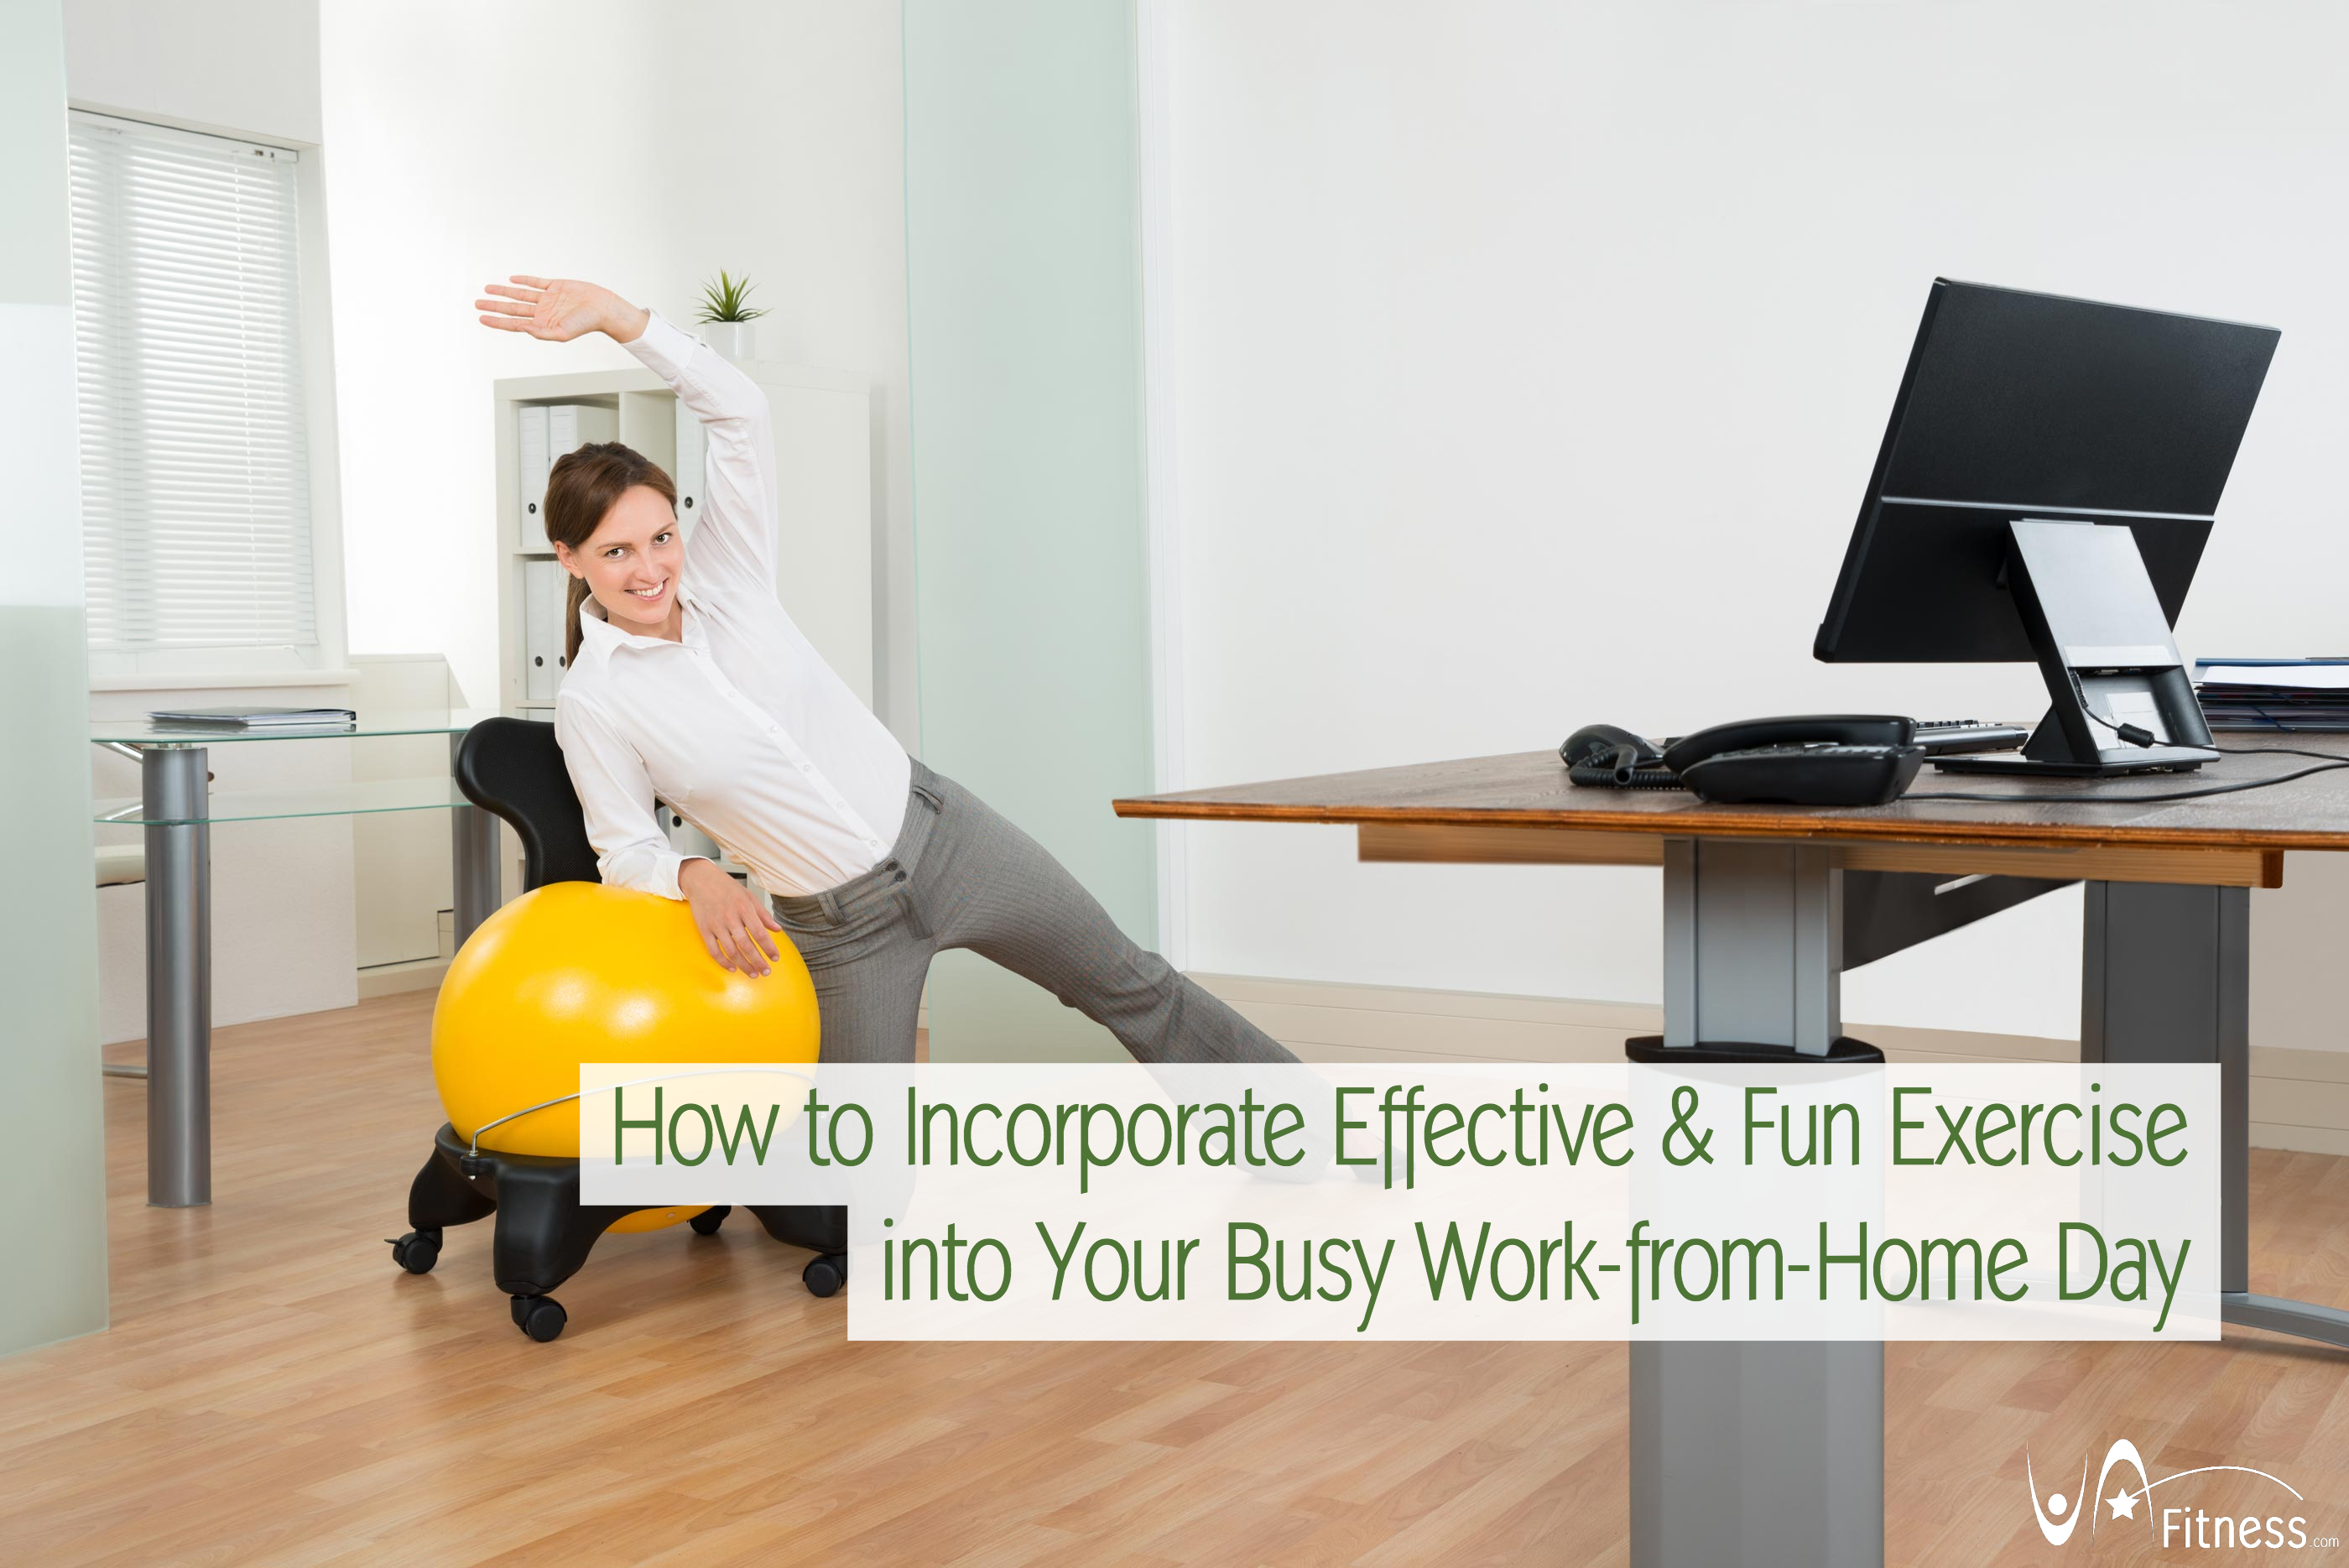 https://virtualassistantfitness.com/wp-content/uploads/2018/07/How-to-Incorporate-Effective-and-Fun-Exercise-into-Your-Busy-Work-from-Home-Day.jpg